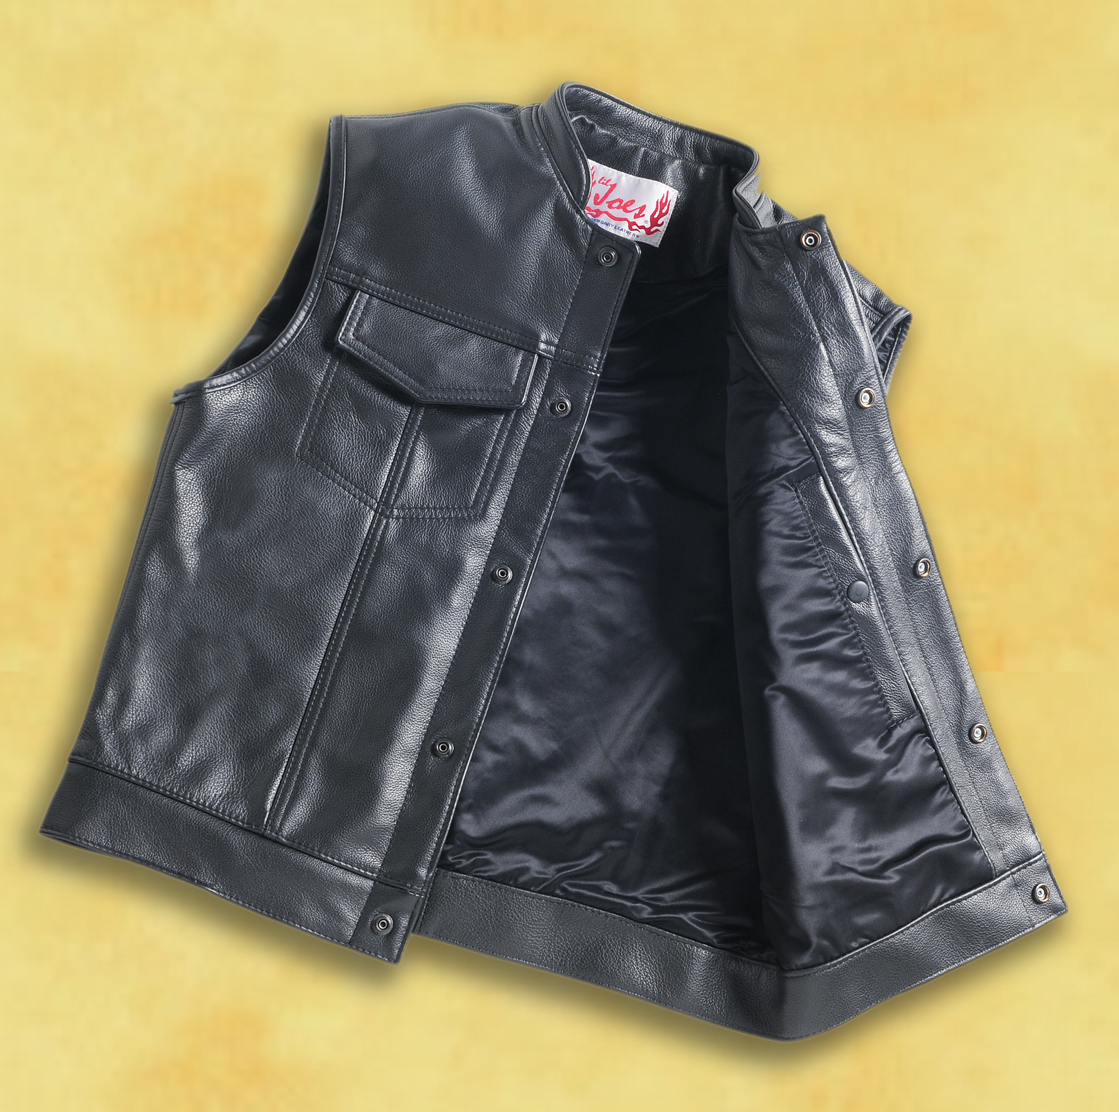 Little joes leather vest xt in stata forex